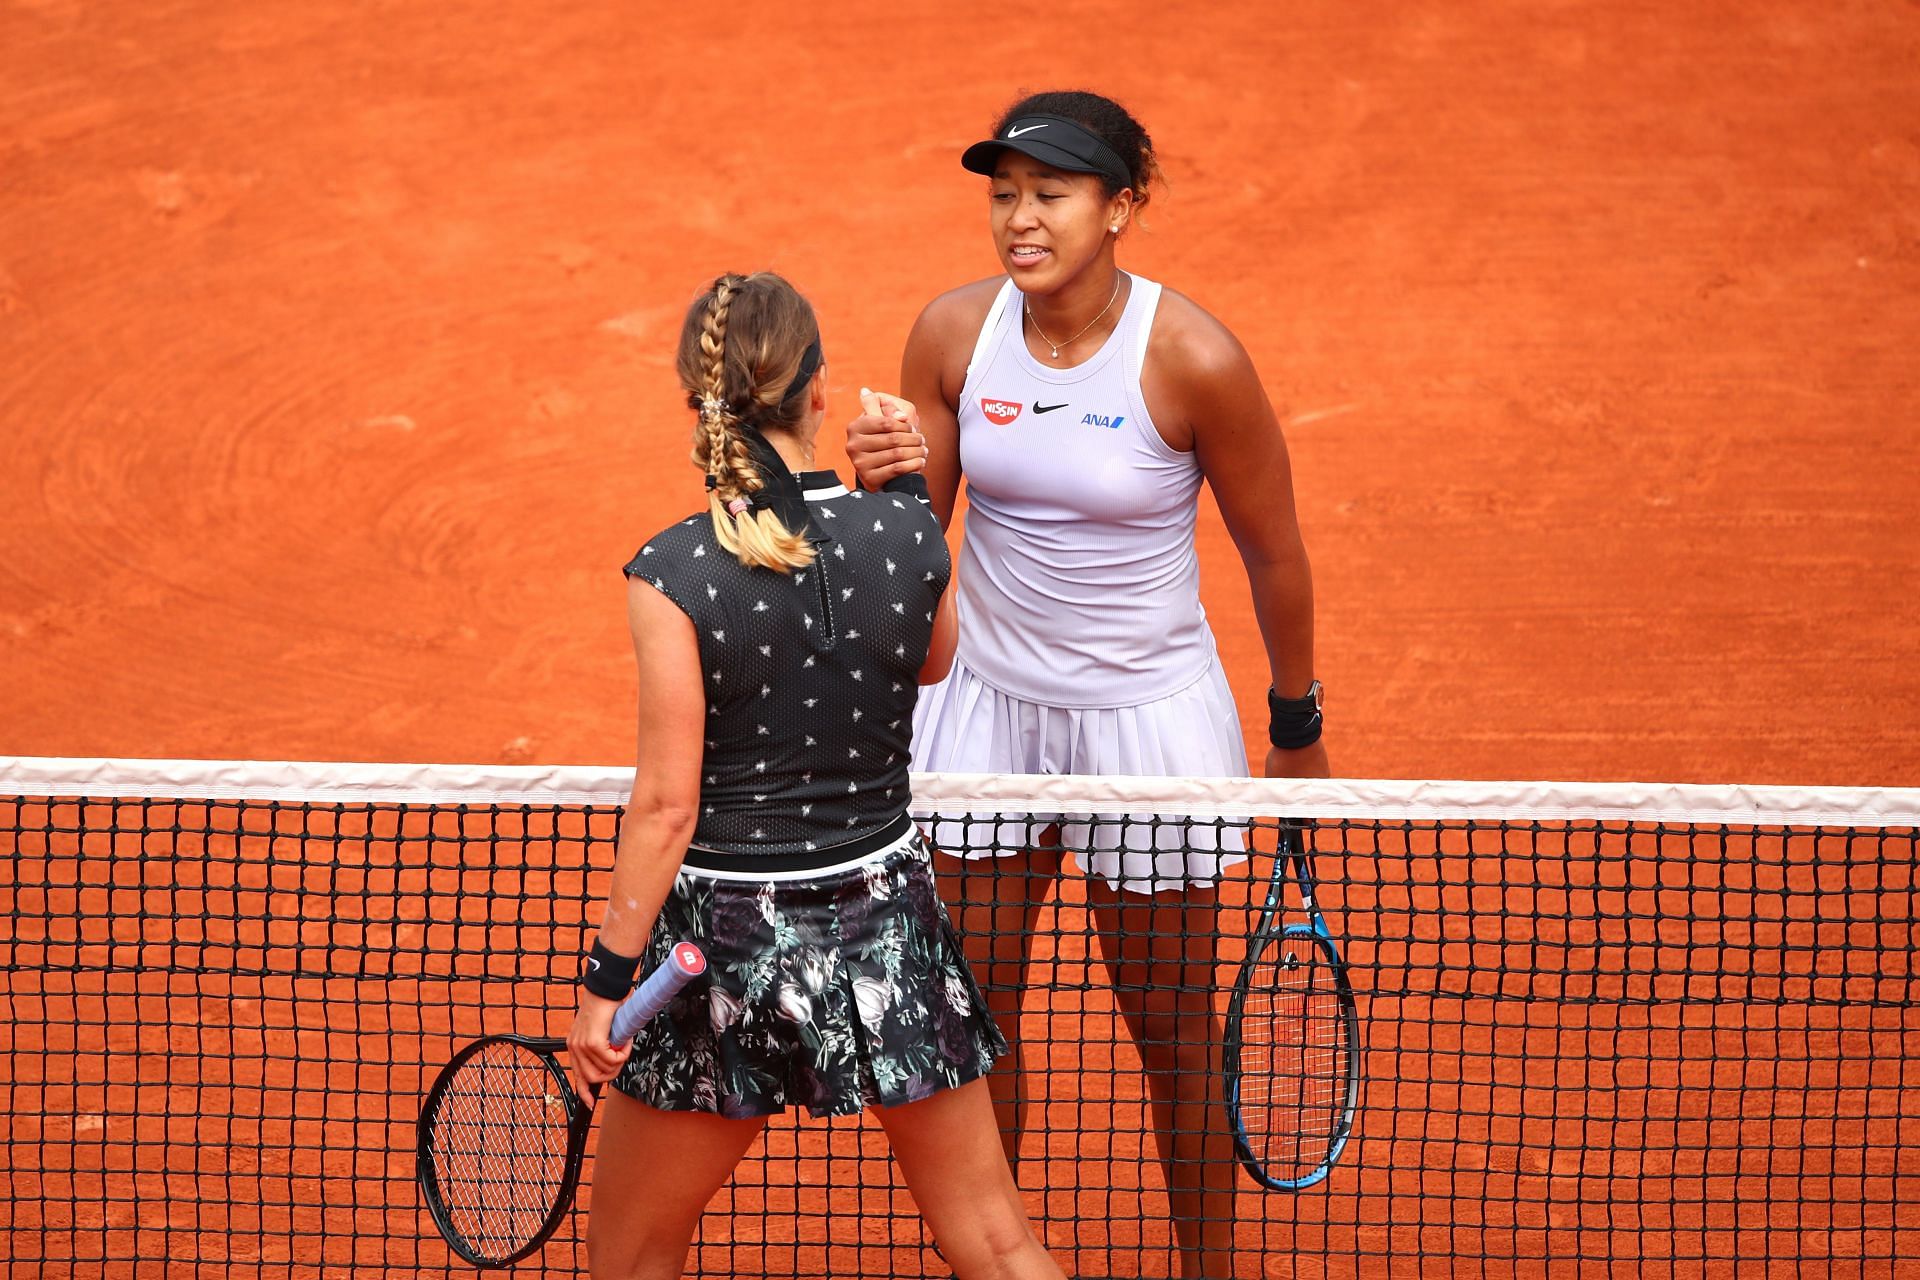 Naomi Osaka and Victoria Azarenka played one of the best matches of the tournament.